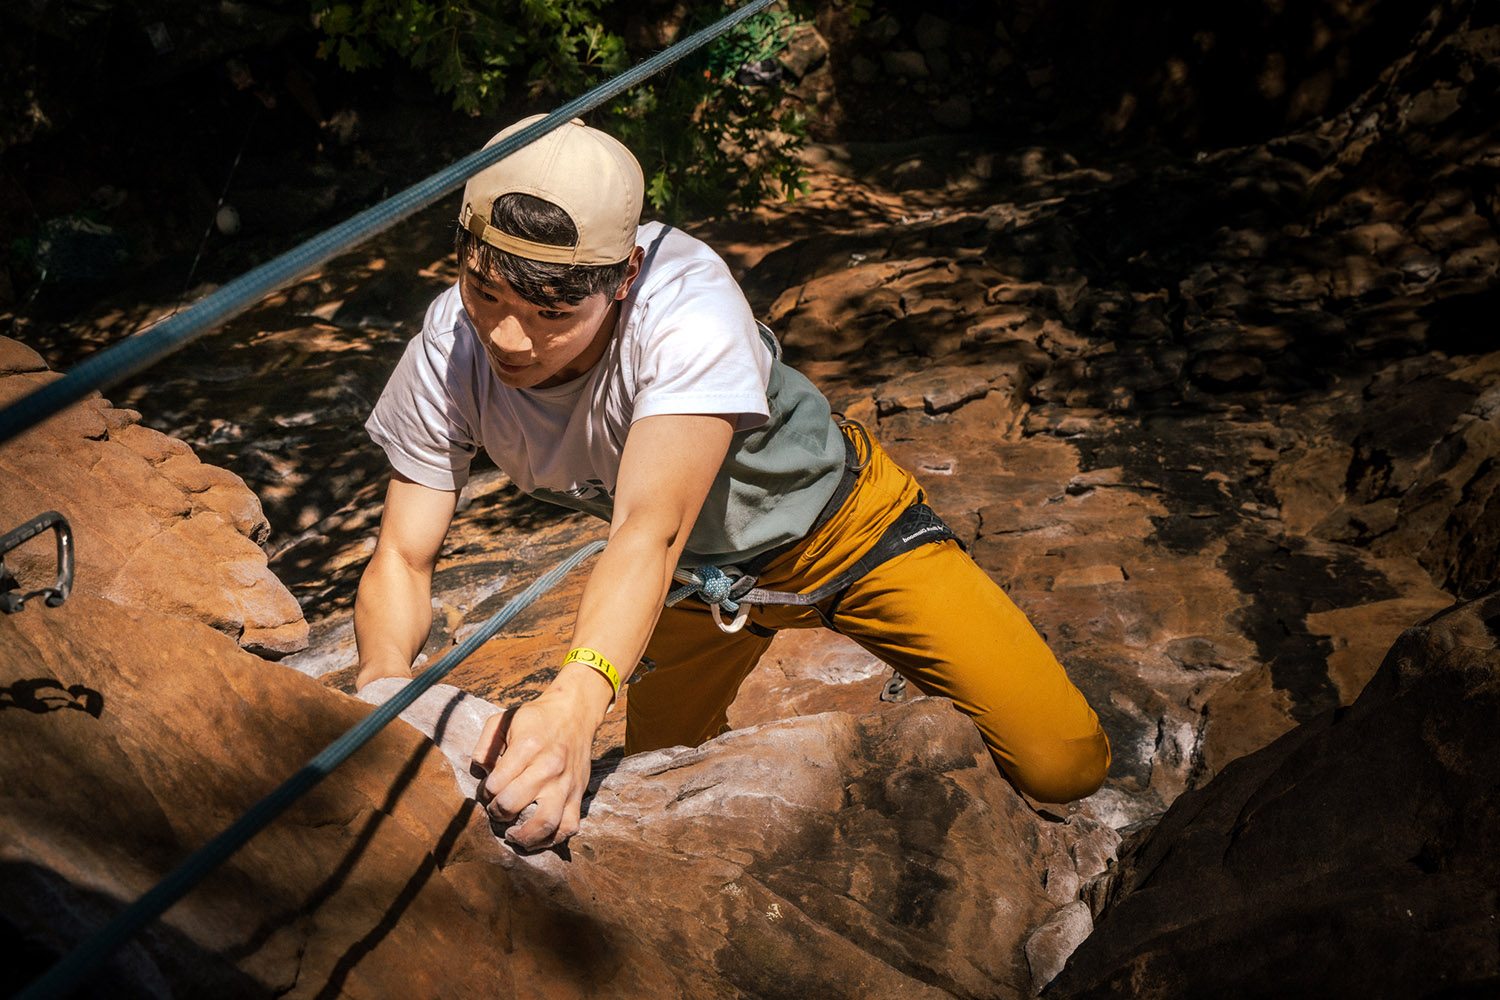 UNK students went rock climbing at Horseshoe Canyon Ranch in northwest Arkansas during an Outdoor Adventure trip last October. A similar trip is planned this spring. (Photos by Jon Dockweiler)